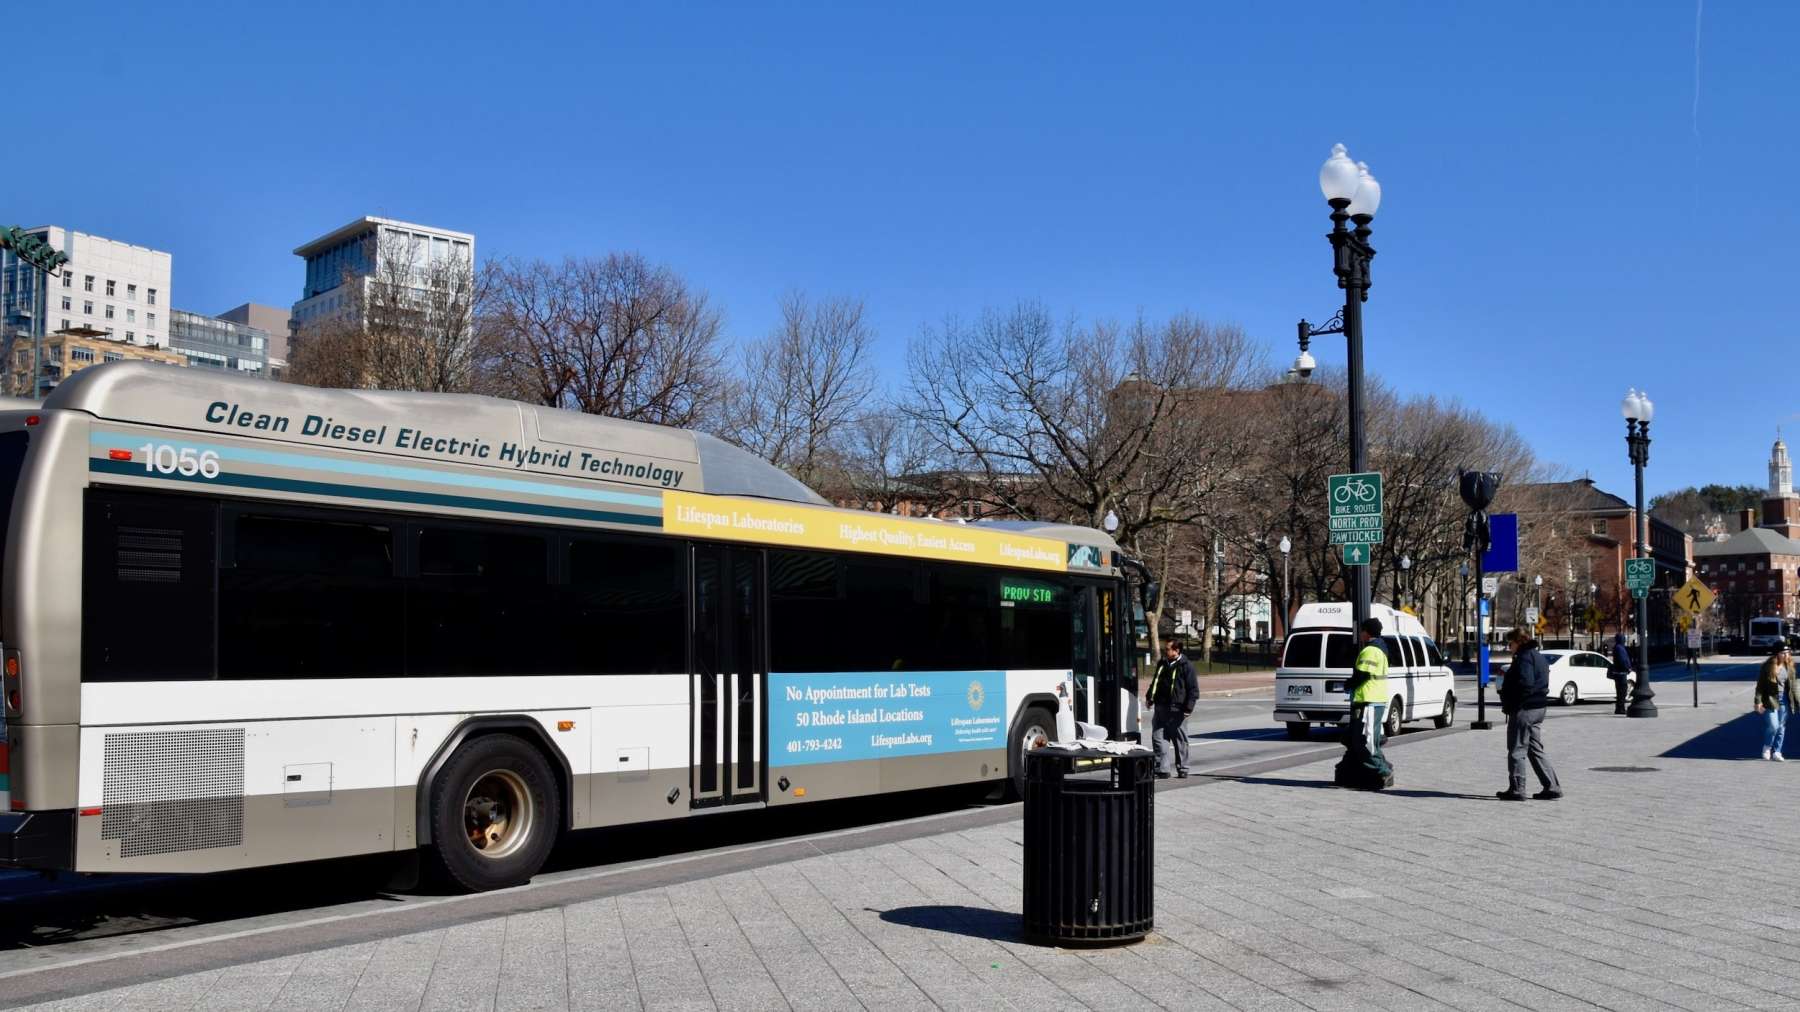 Will the proposed multi-hub bus plan require RI to pay back past Federal grants?